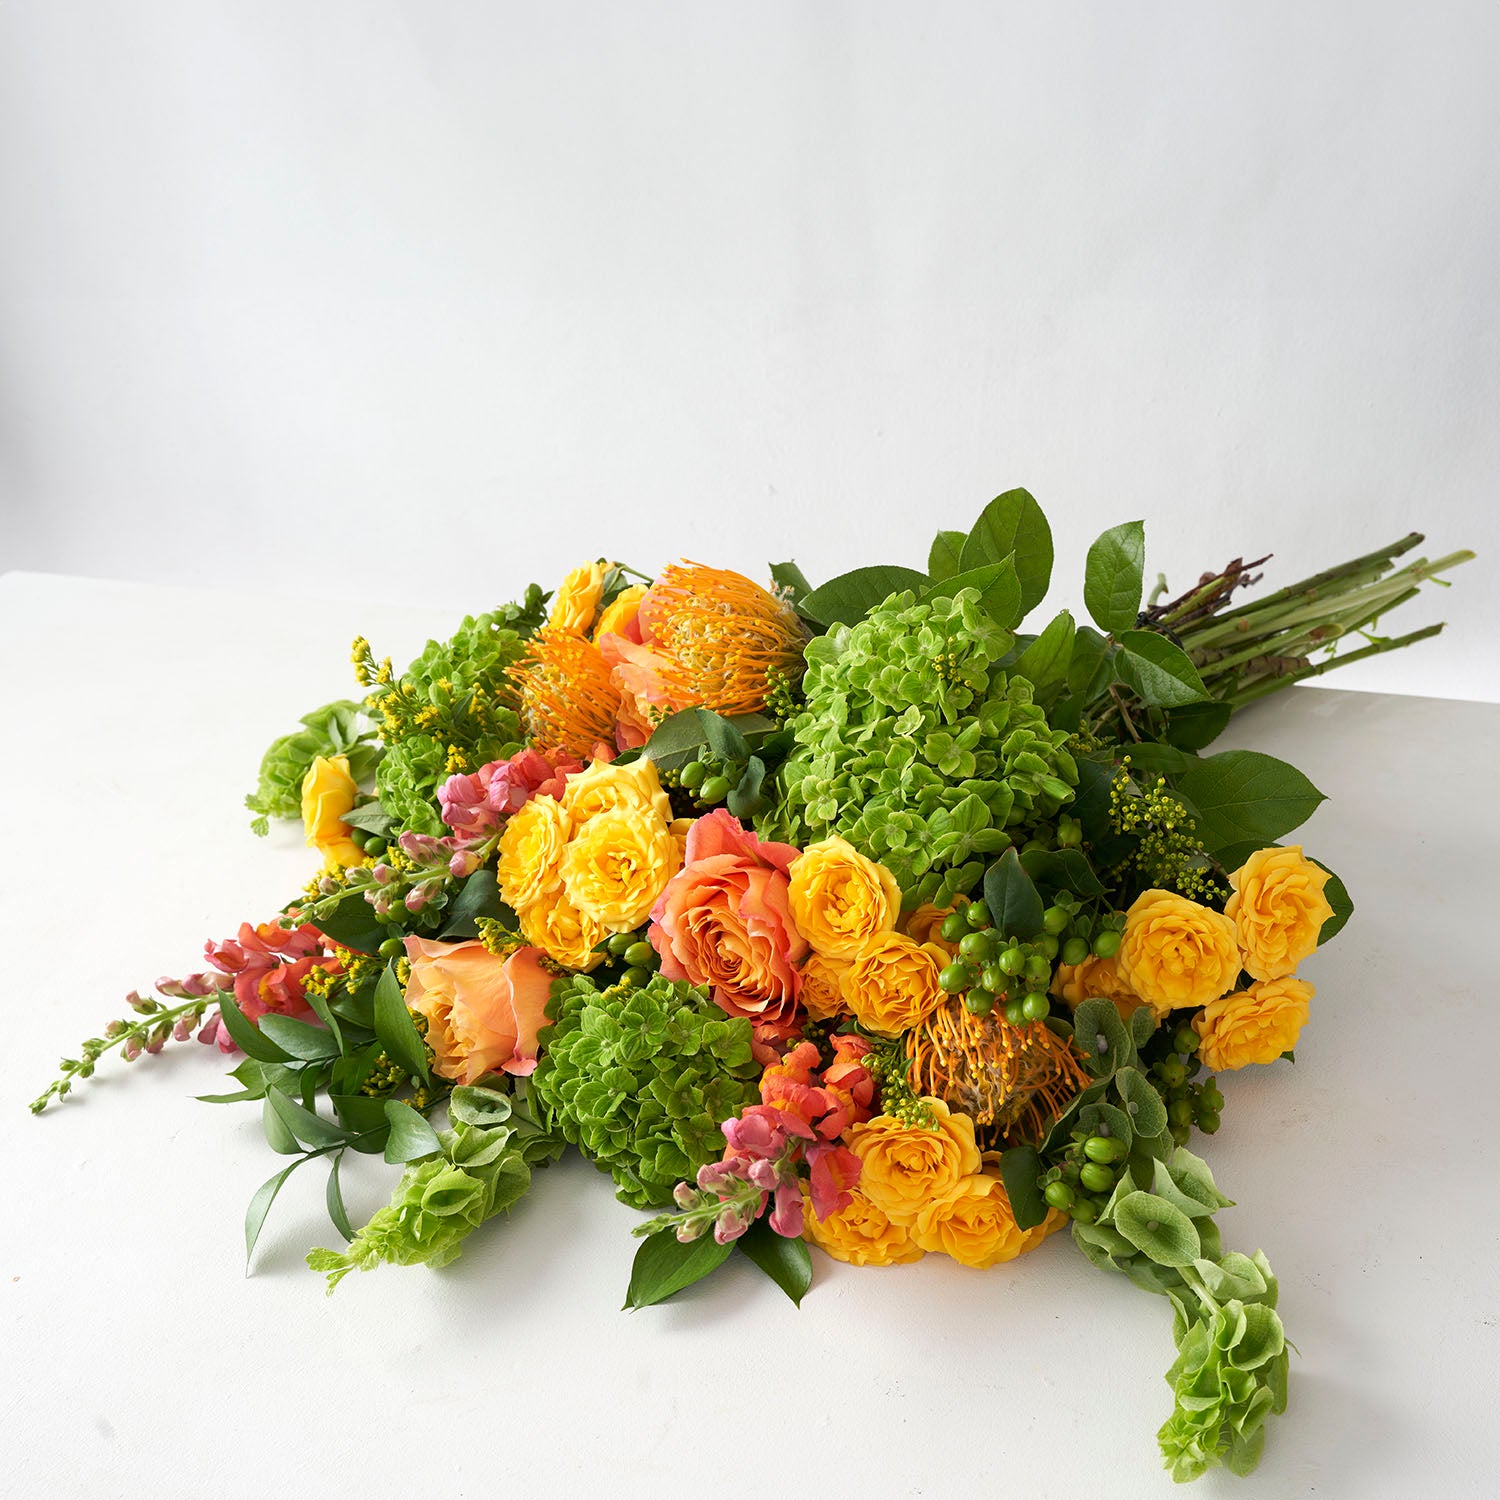 Large bouquet of lime green hydrangea, orange roses yellow spray roses, and orange snapdragons on white background.